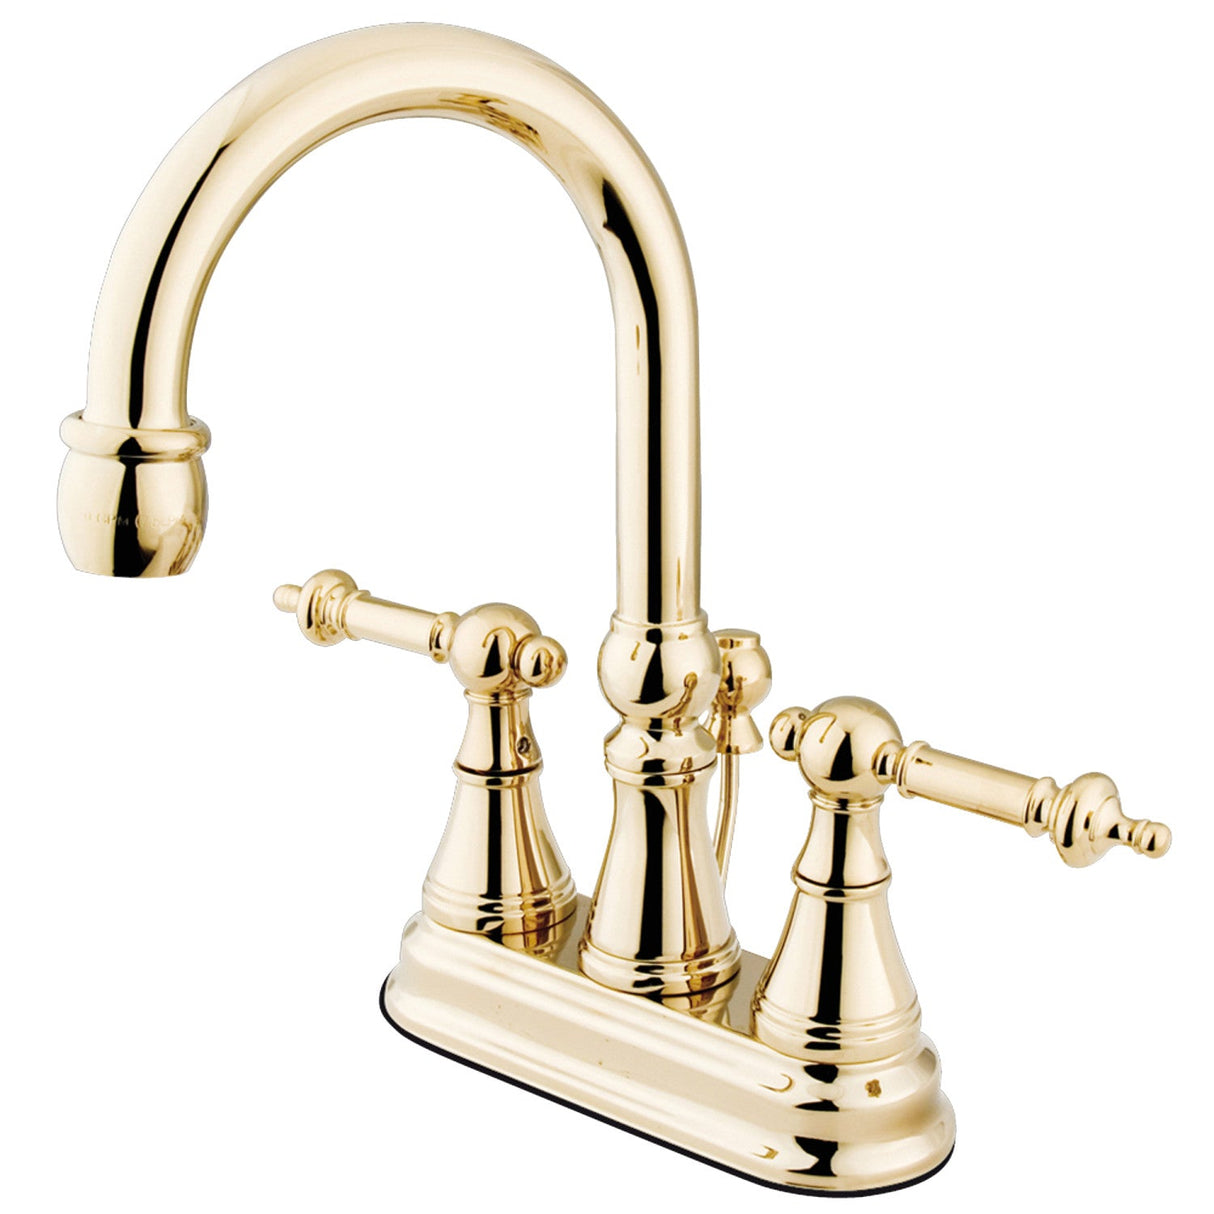 Templeton KS2612TL Two-Handle 3-Hole Deck Mount 4" Centerset Bathroom Faucet with Brass Pop-Up, Polished Brass